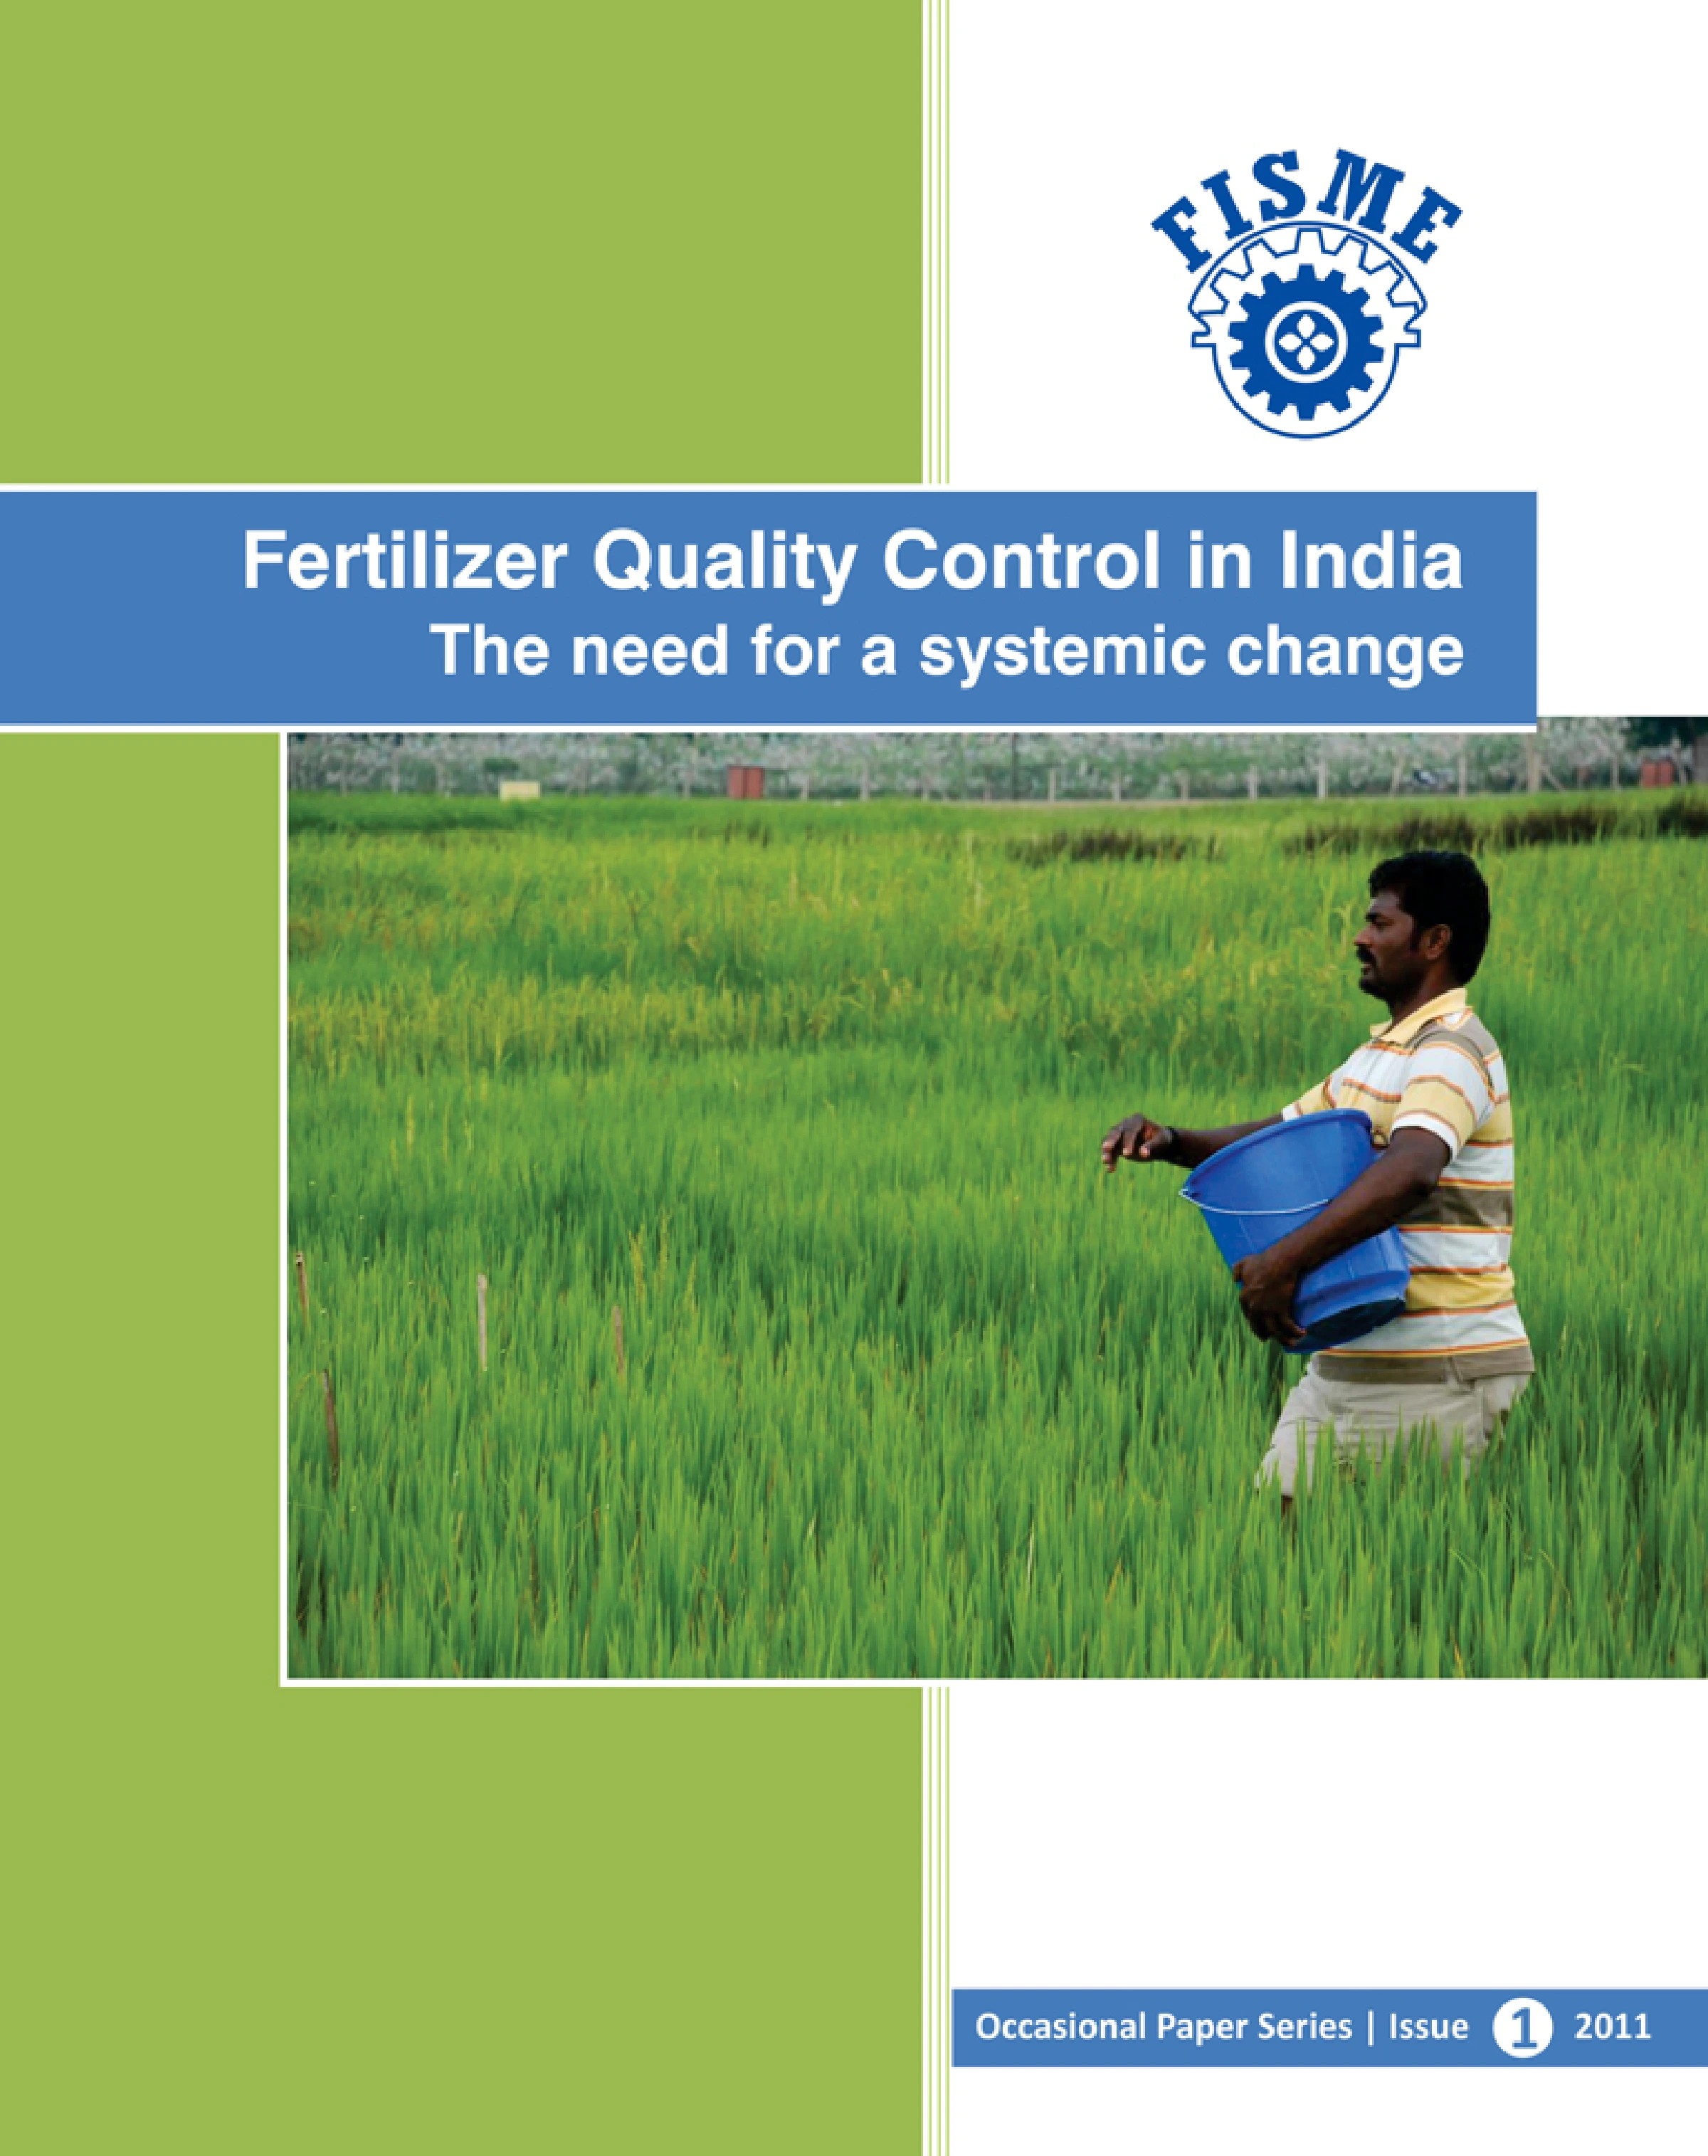 fertilizer-quality-control-in-india-the-need-for-a-systemic-change